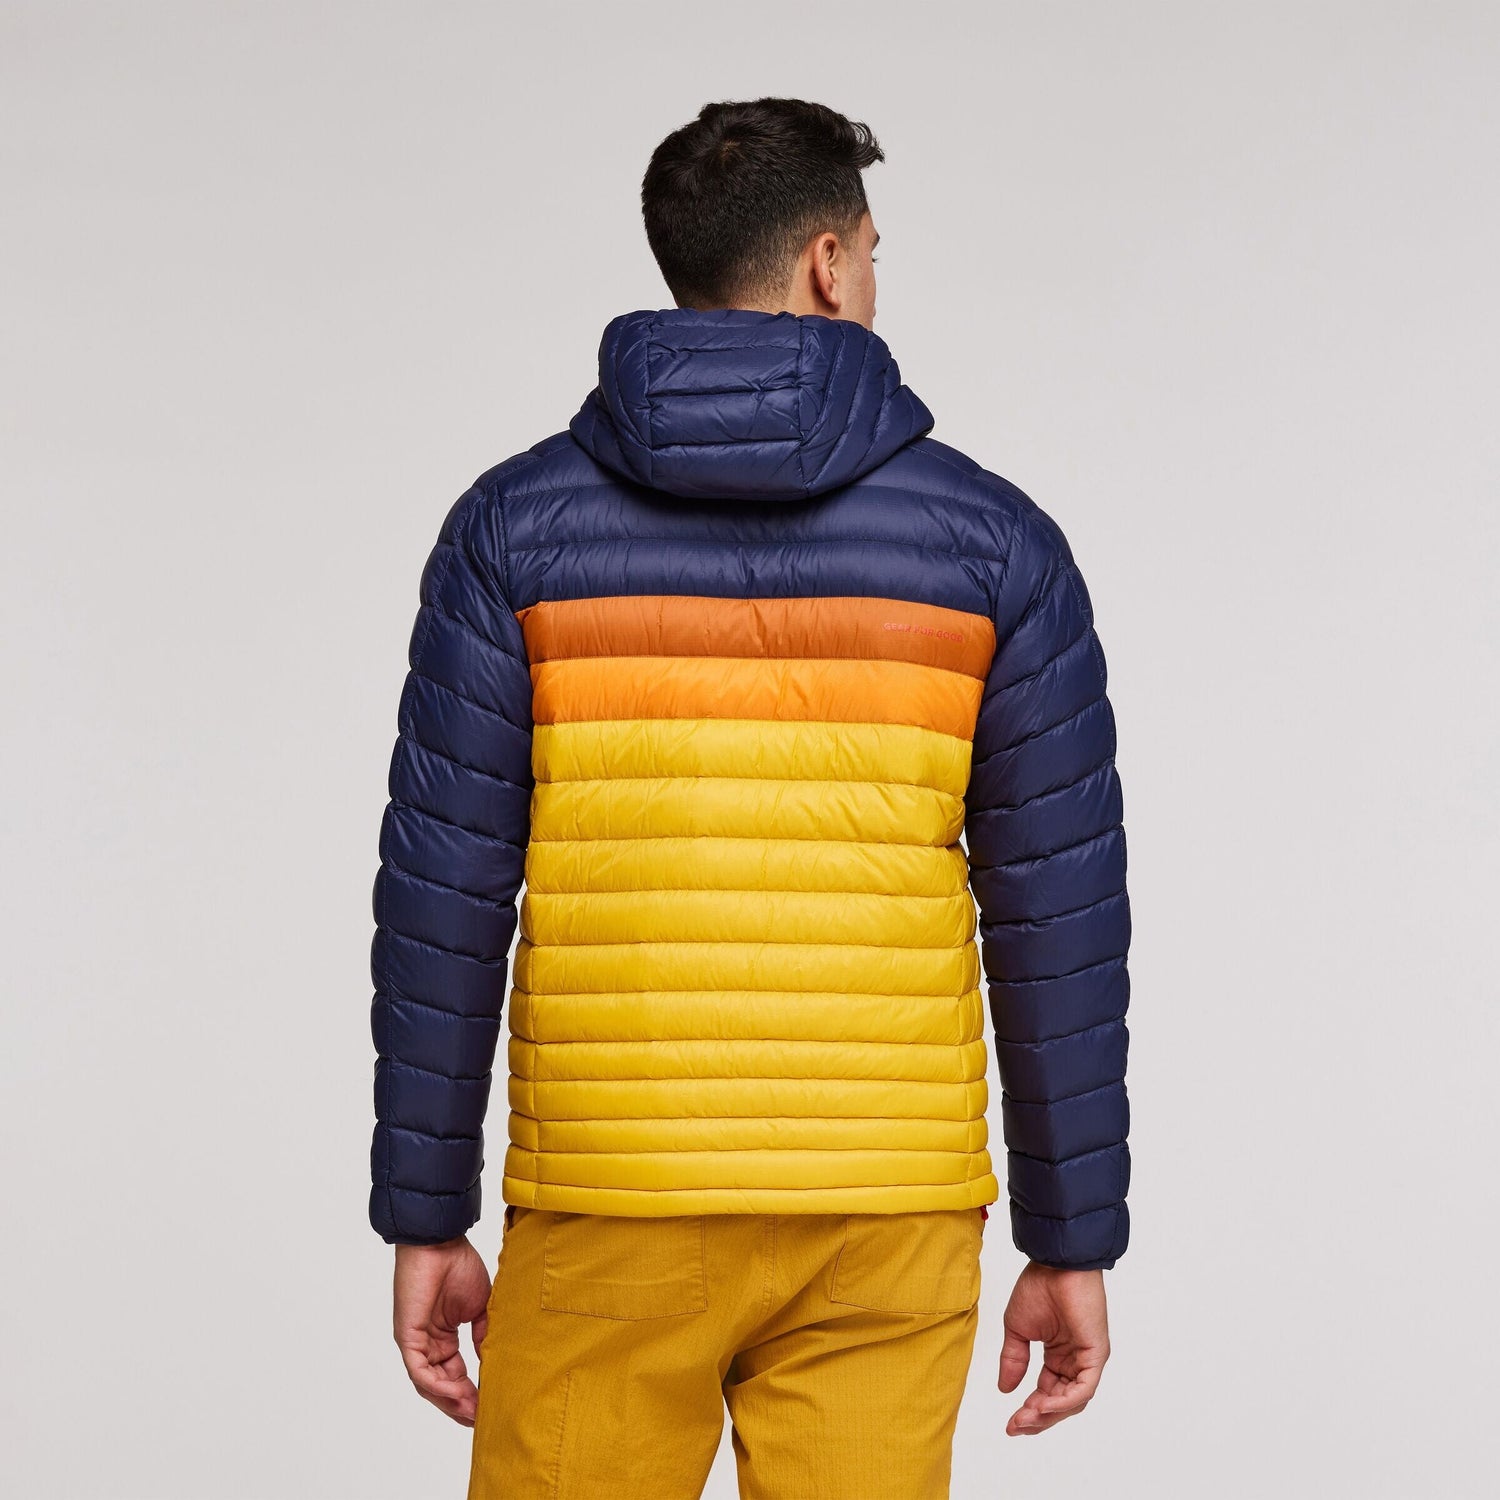 Cotopaxi M's Fuego Down Hooded Jacket - Responsibly sourced down Maritime & Sunset Jacket